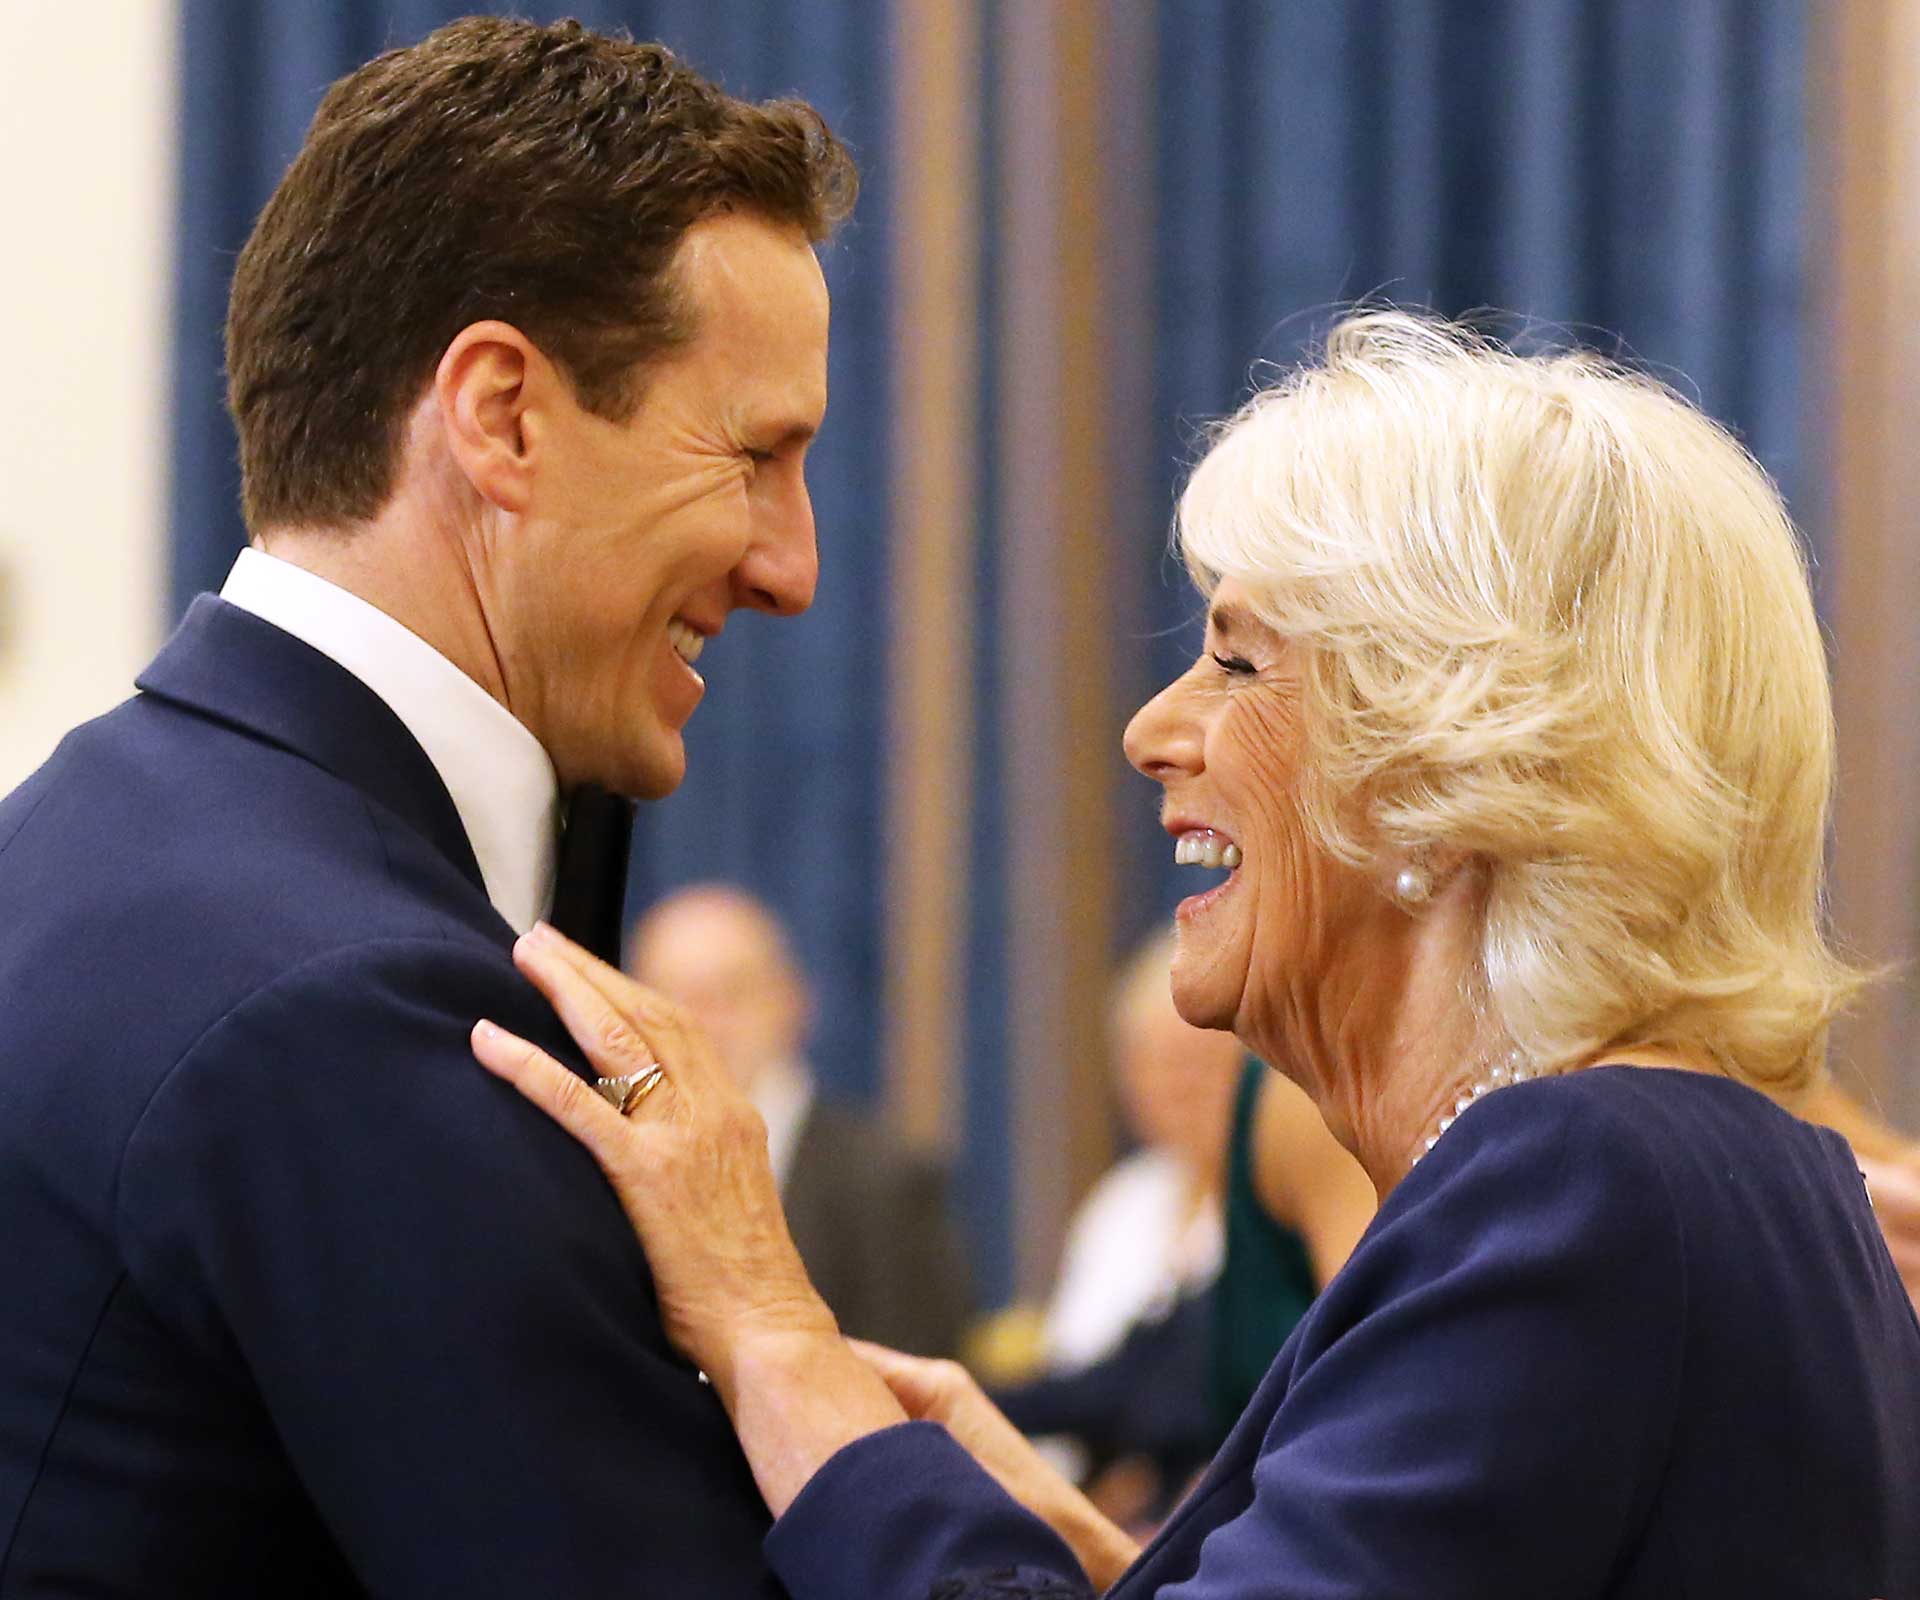 Brendan Cole dancing with Camilla, Duchess of Cornwall